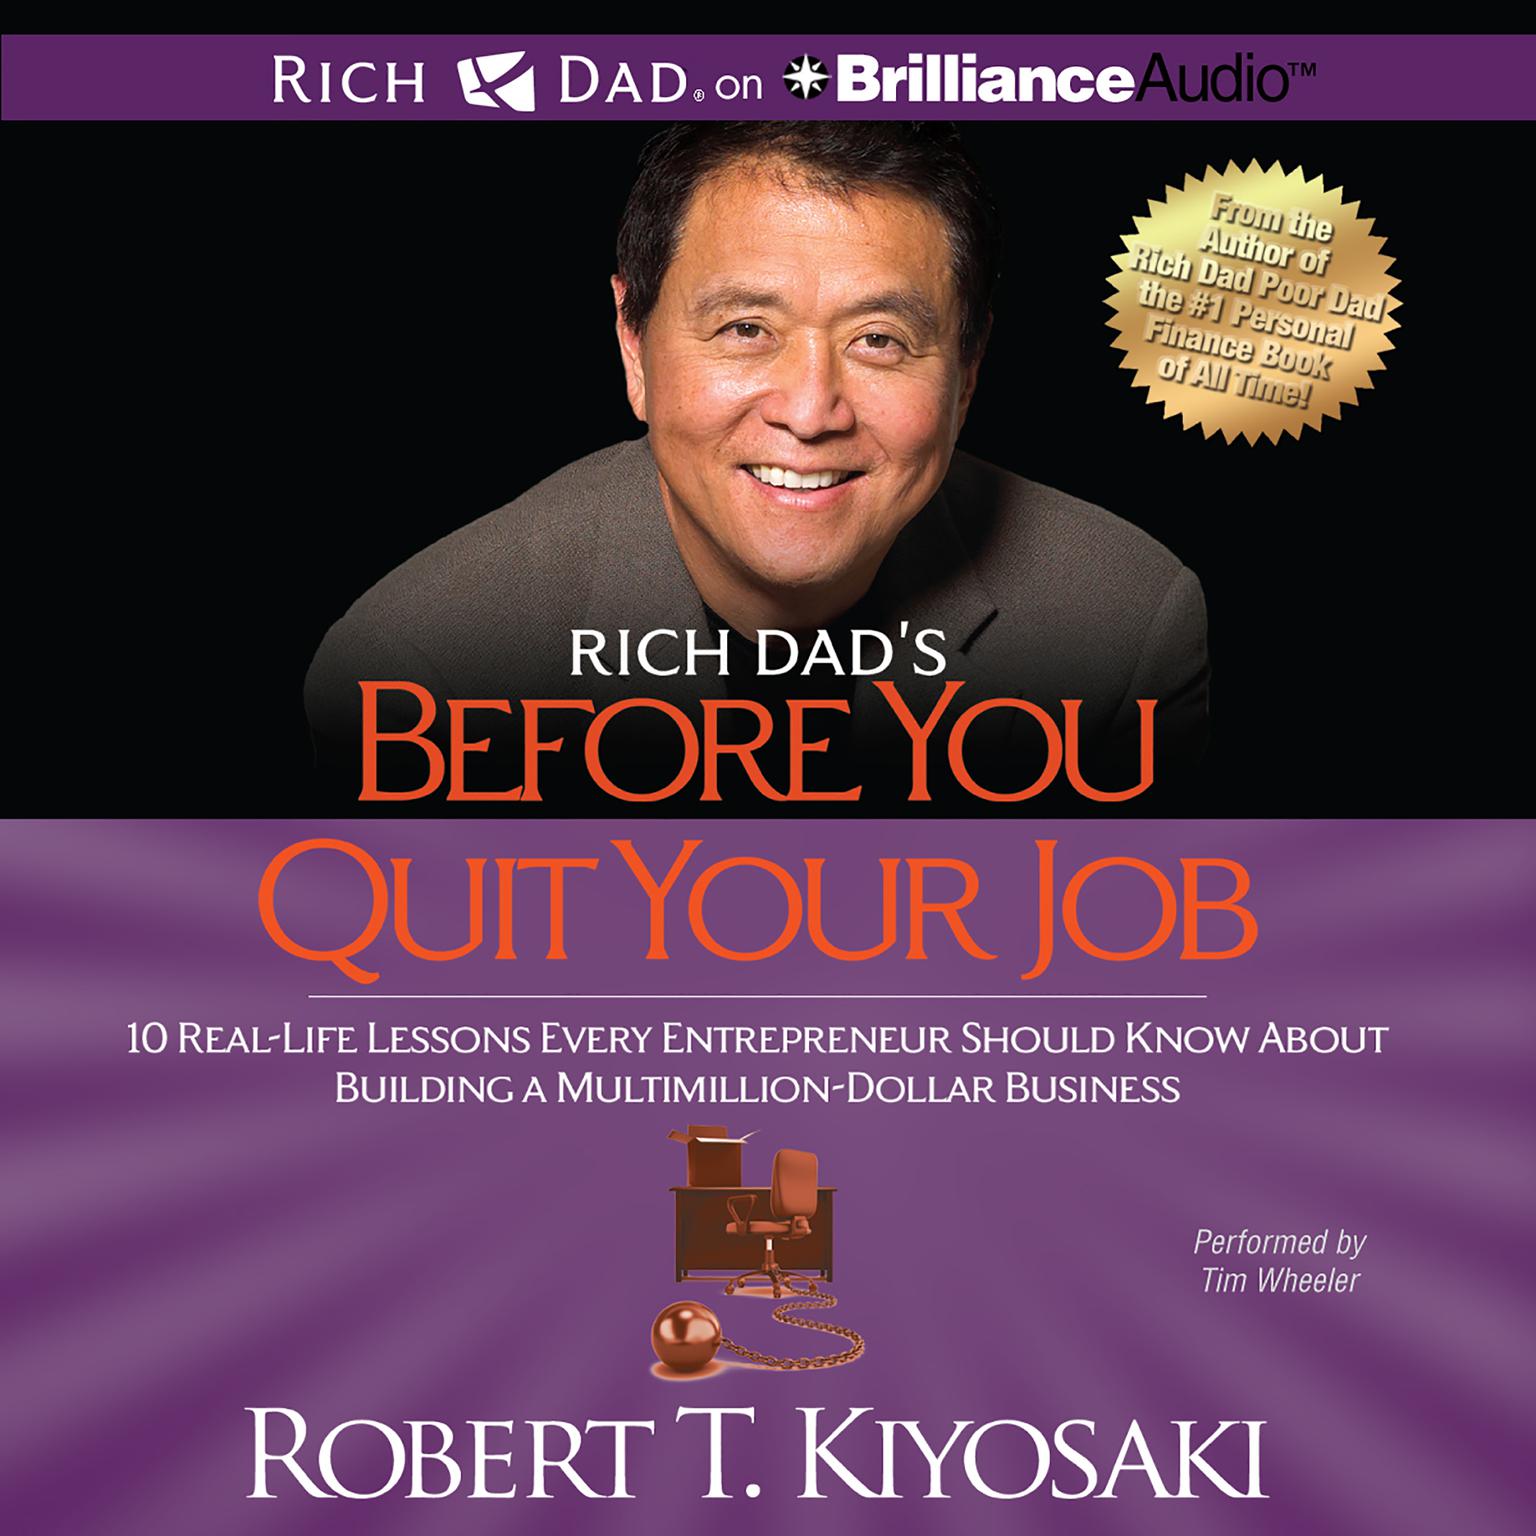 Rich Dads Before You Quit Your Job: 10 Real-Life Lessons Every Entrepreneur Should Know About Building a Multimillion-Dollar Business Audiobook, by Robert T. Kiyosaki